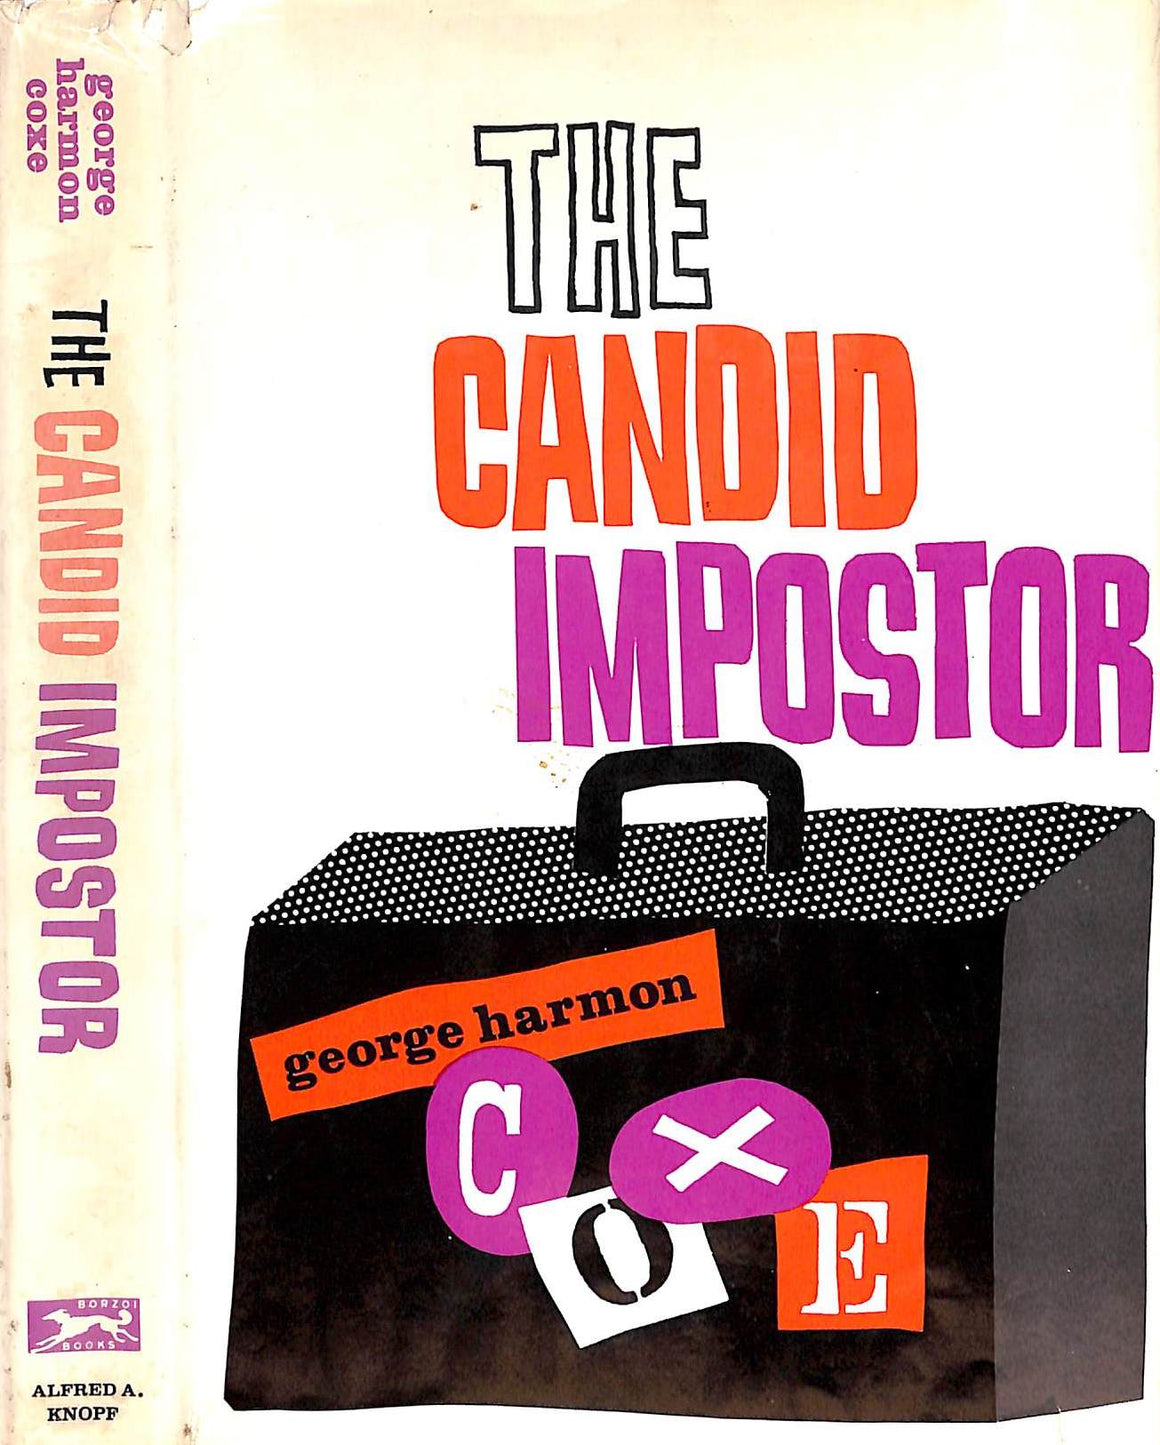 "The Candid Imposter" 1968 HARMON, George